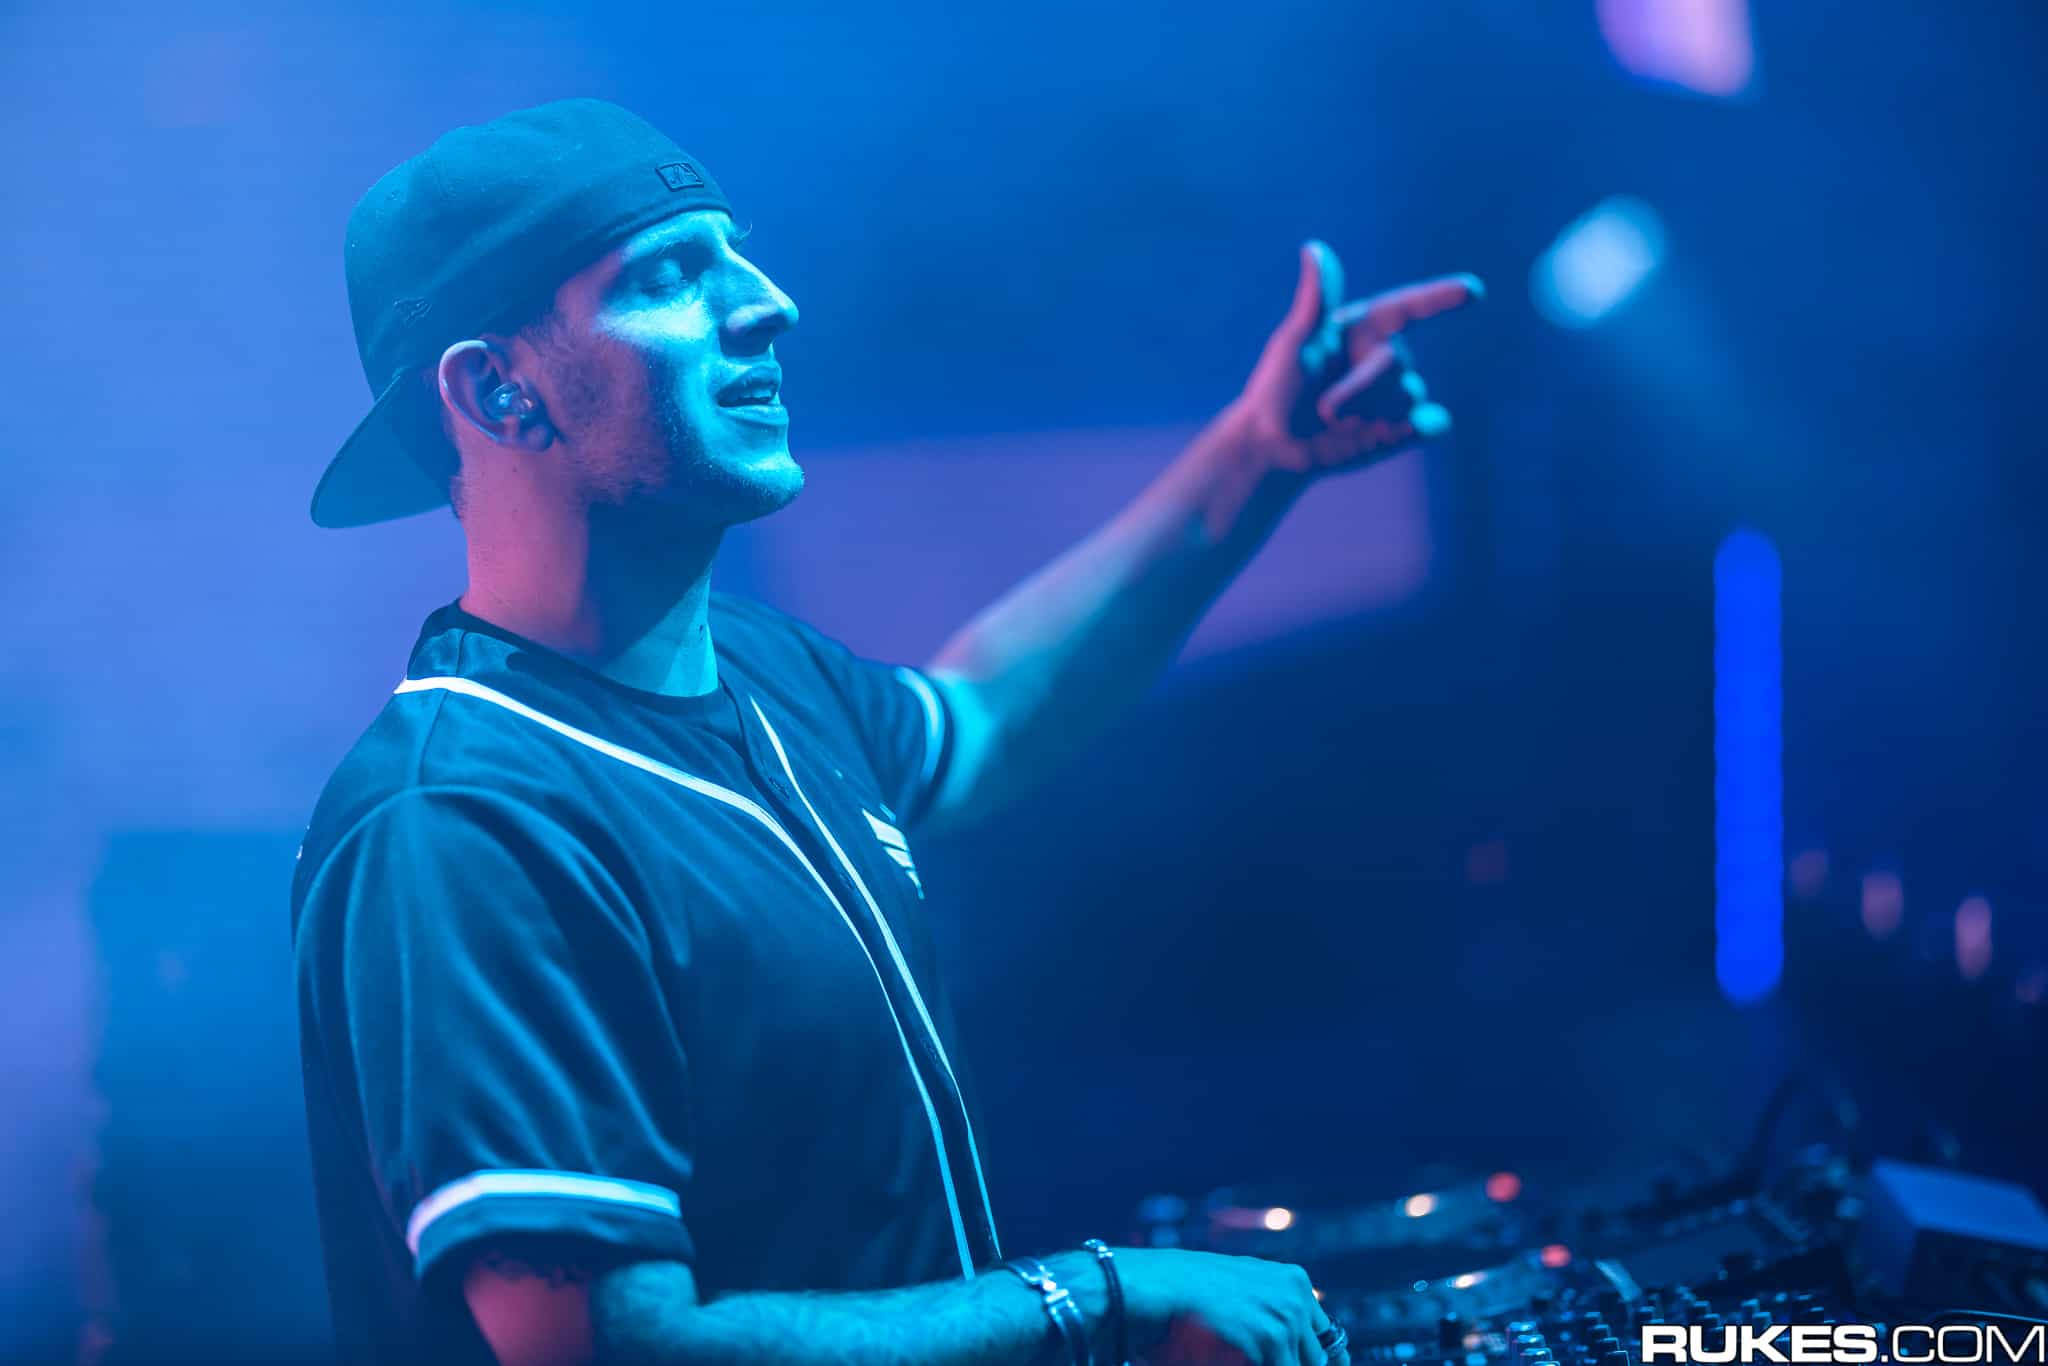 ILLENIUM’s long anticipated track ‘All That Really Matters’ is out now: Listen